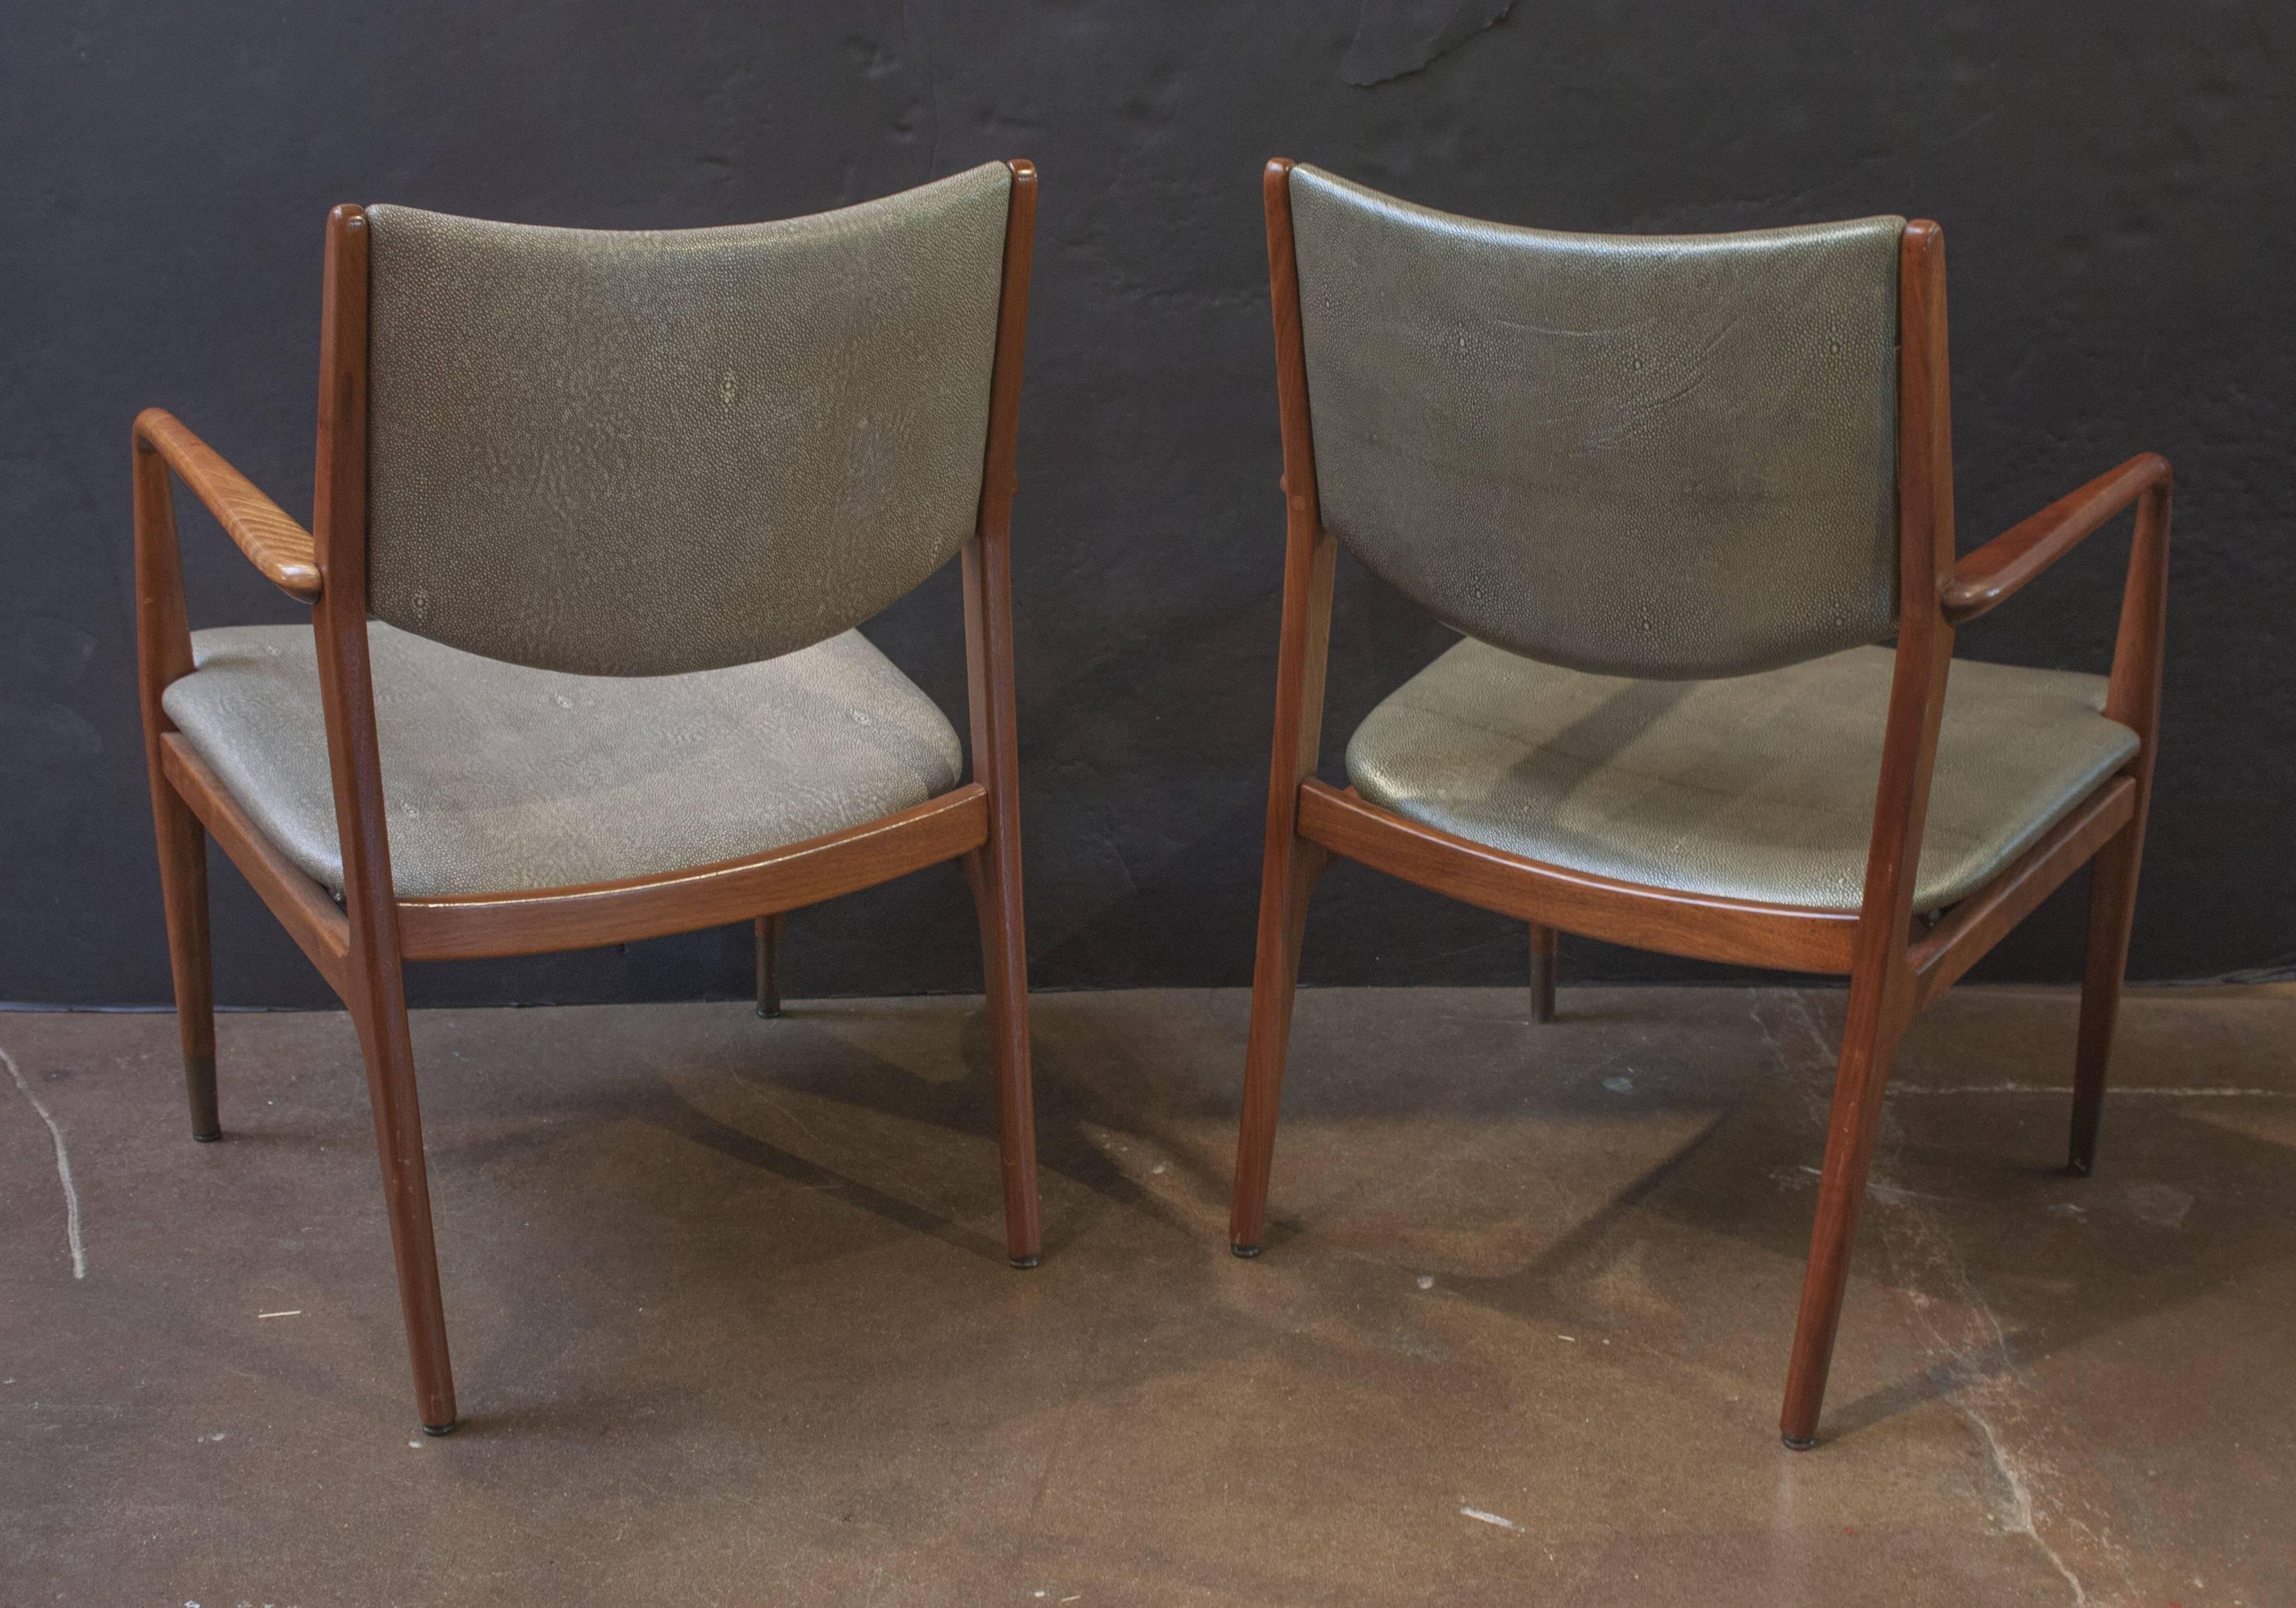 A handsome and solid pair of Mid-Century Modern walnut armchairs designed by George Reinoehl for Stow Davis, Grand Rapids, MI. The clean lines and minimalist design invoking the beauty of Scandinavian modernism, while the durable construction speaks